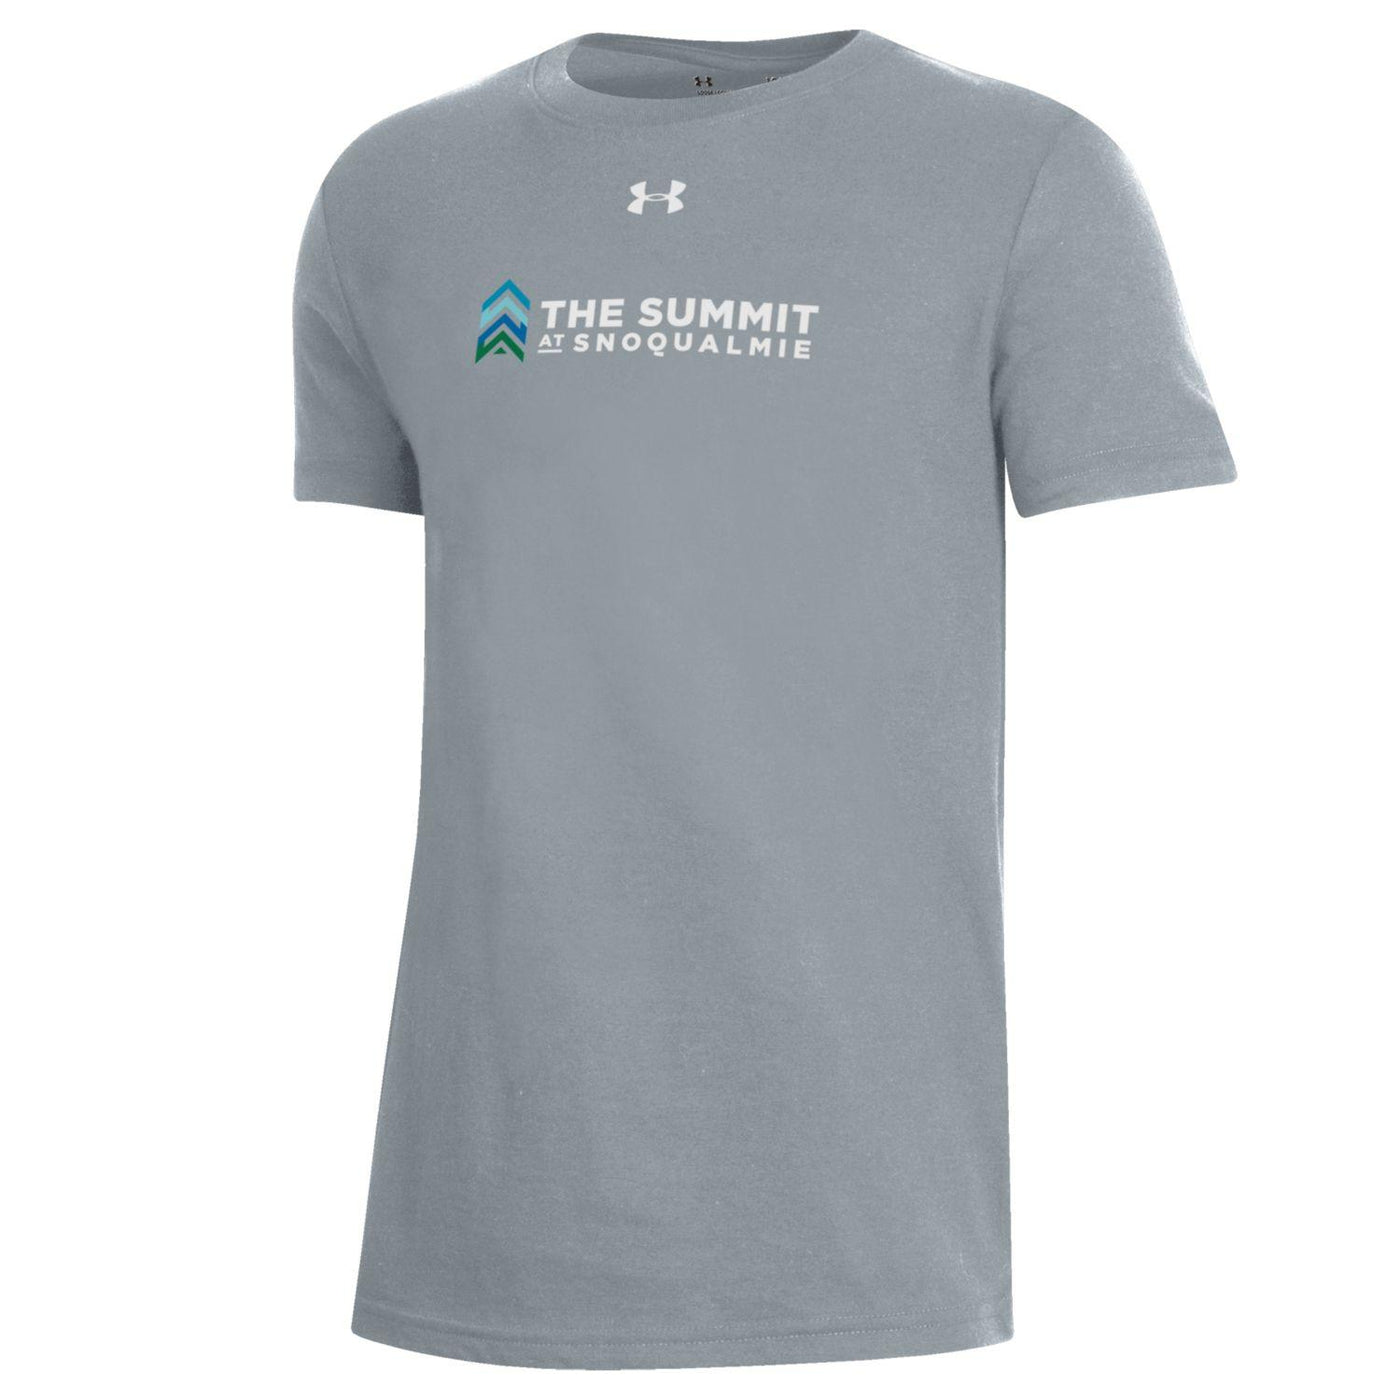 The Summit at Snoqualmie Men's Performance Cotton Tee SMALL